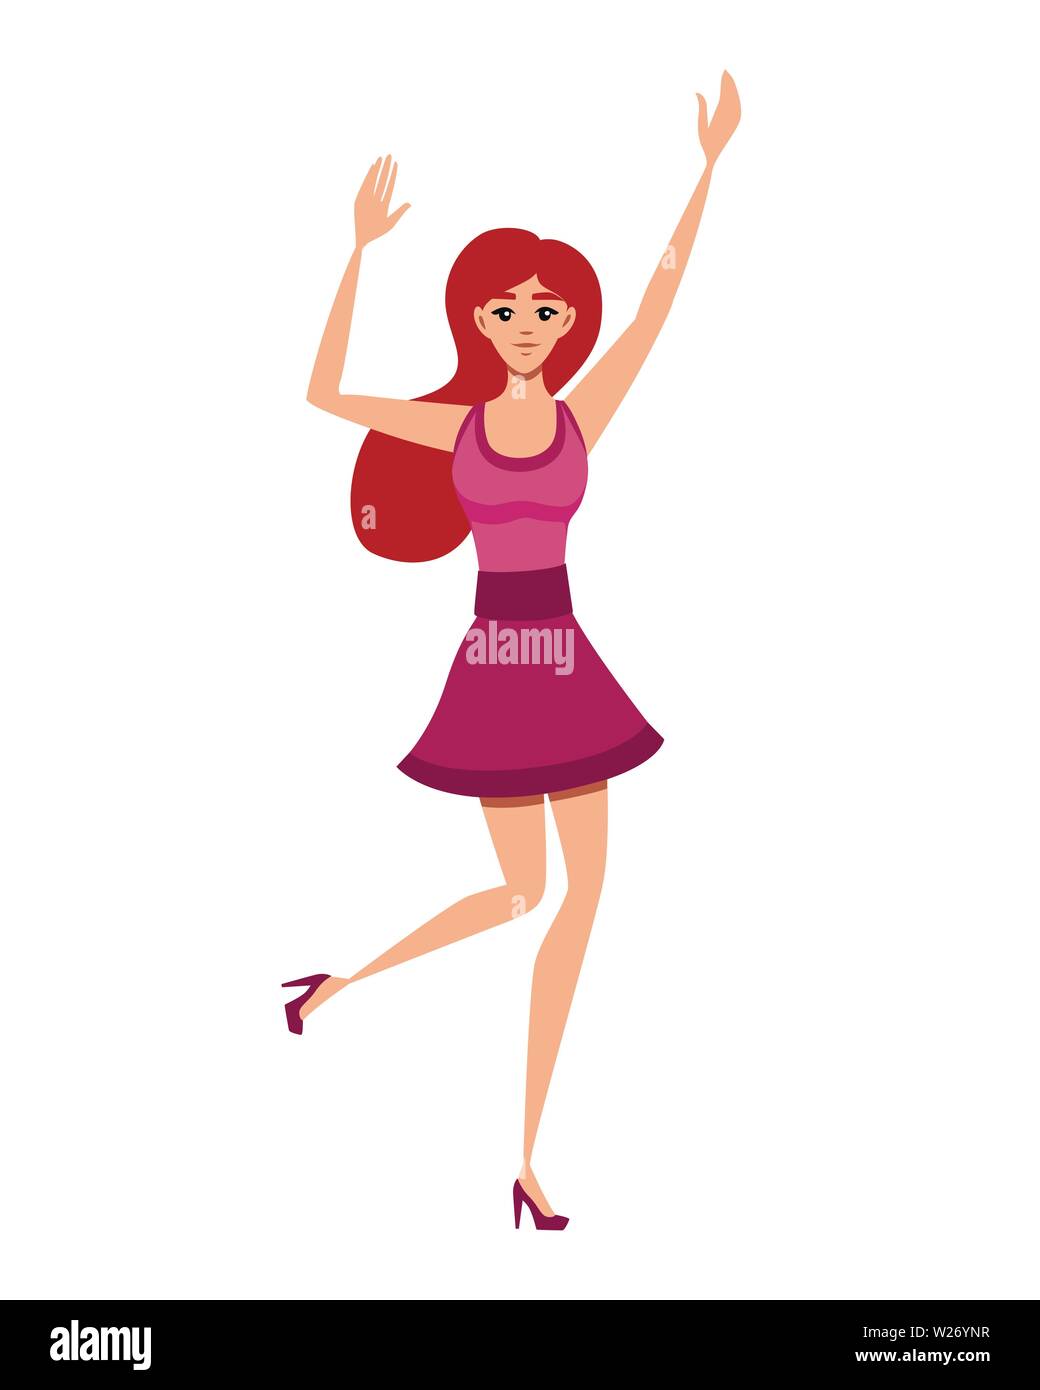 Happy woman in casual clothes with up raised arms cartoon character ...